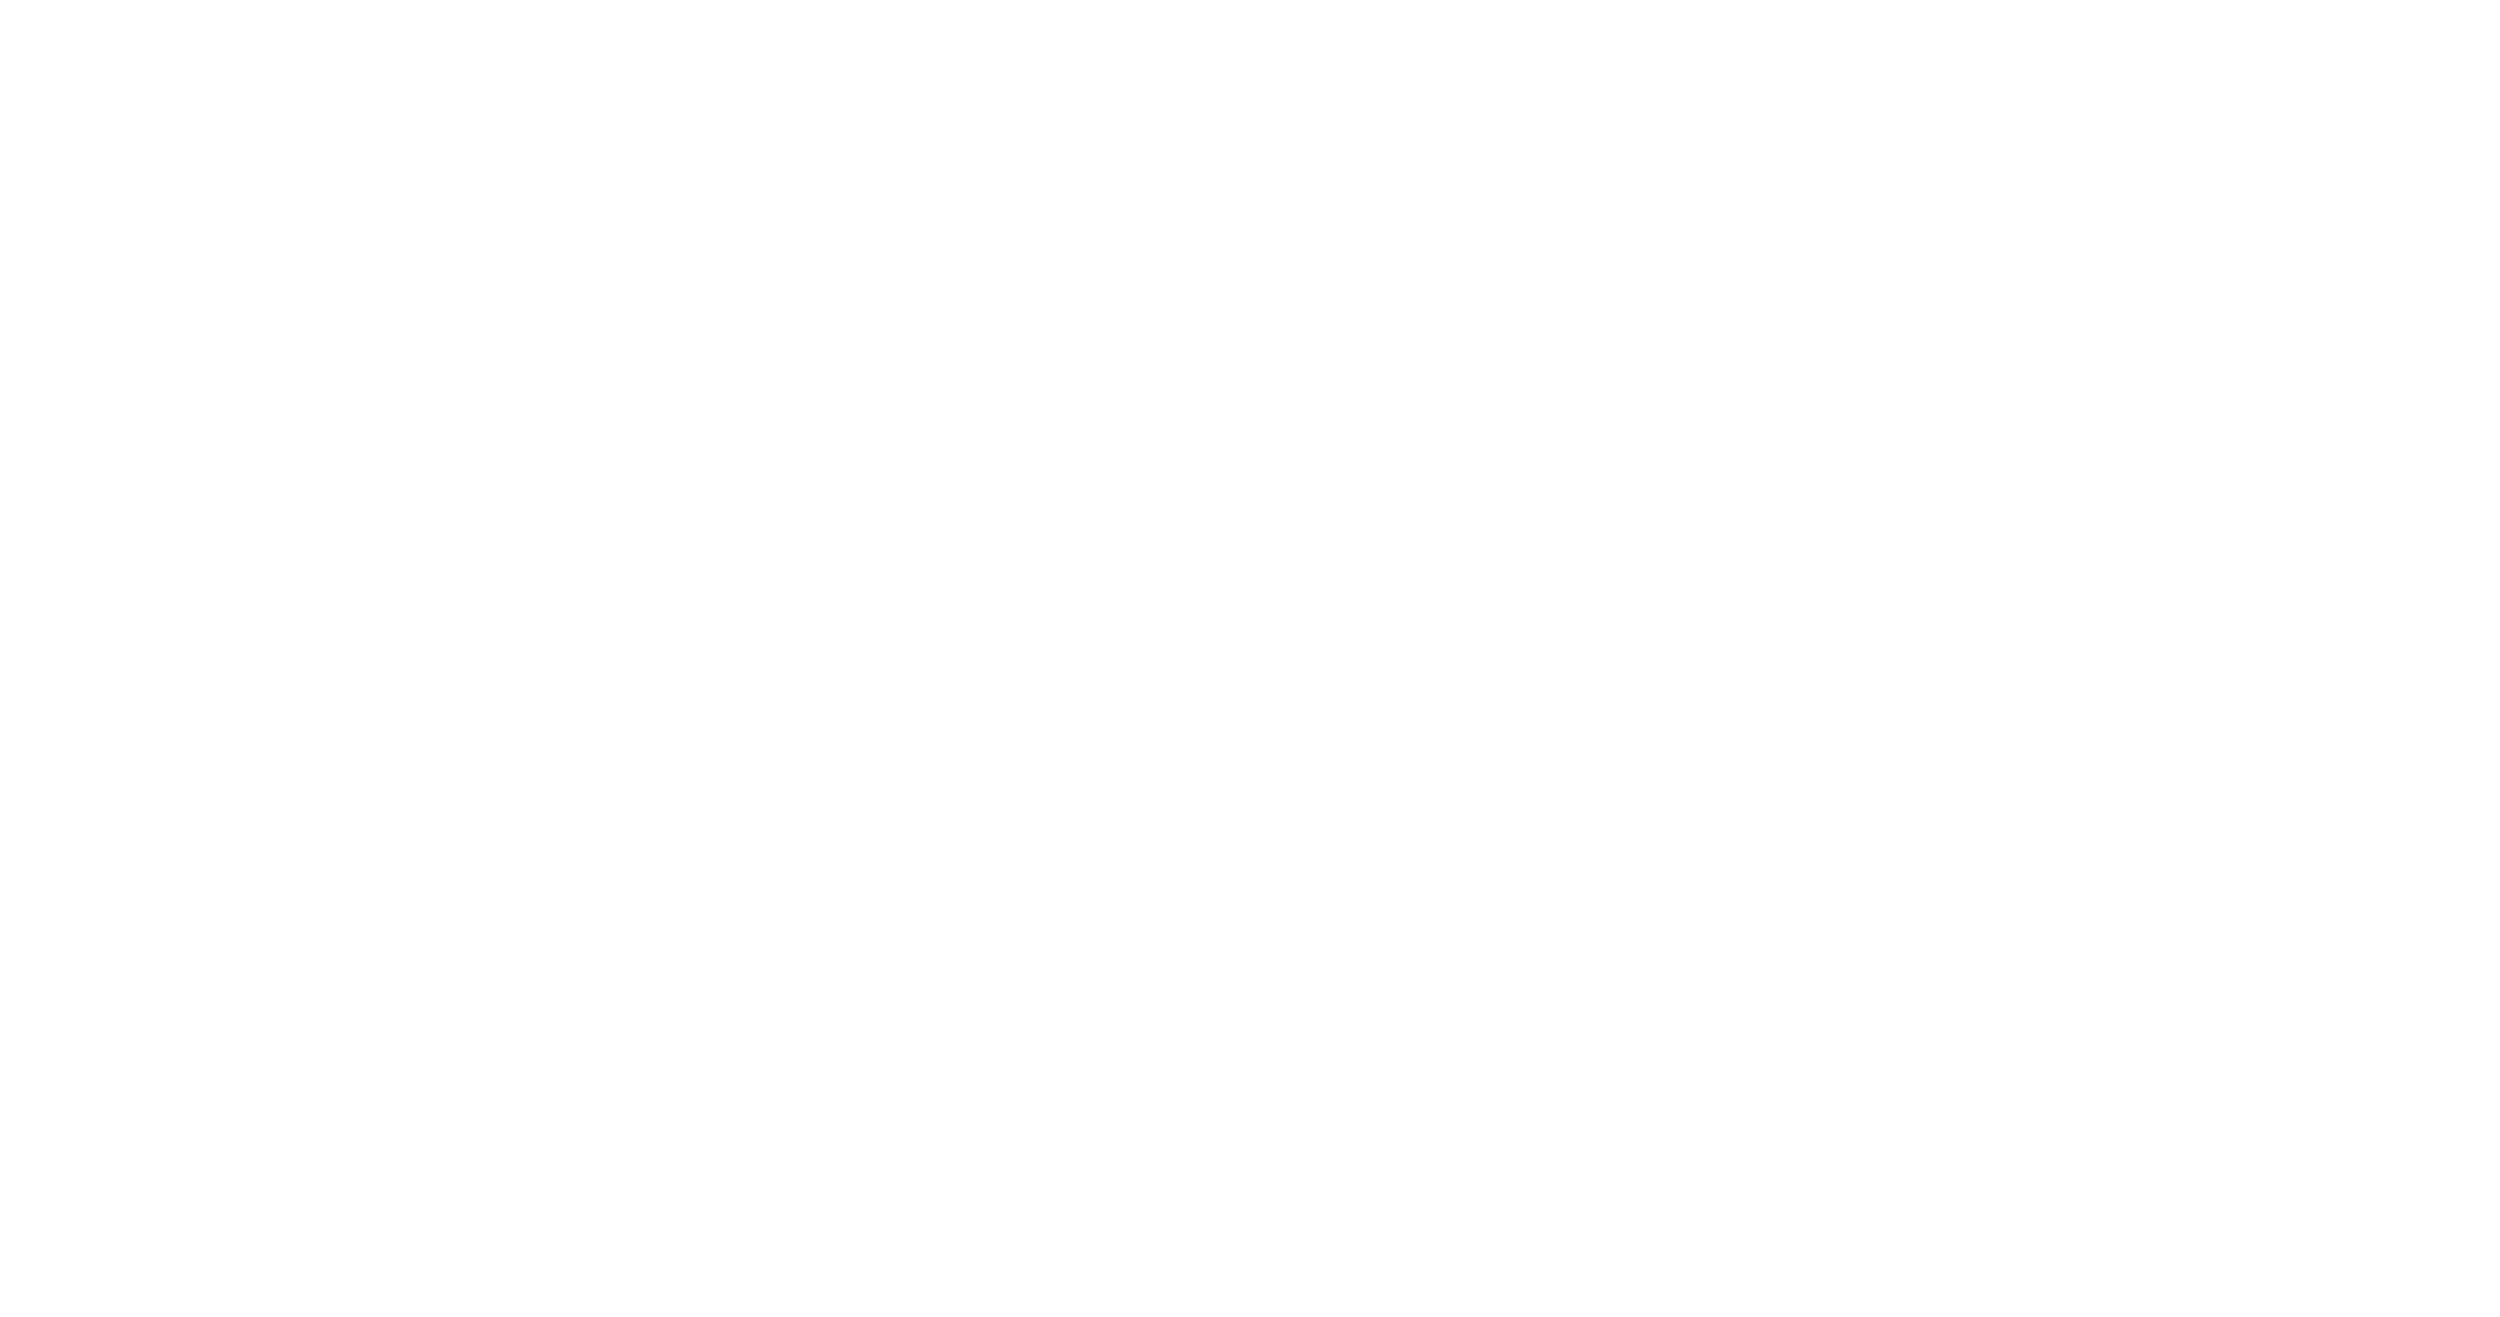 [CITYPNG.COM]HD White Star Wars Logo PNG - 2676x1410.png